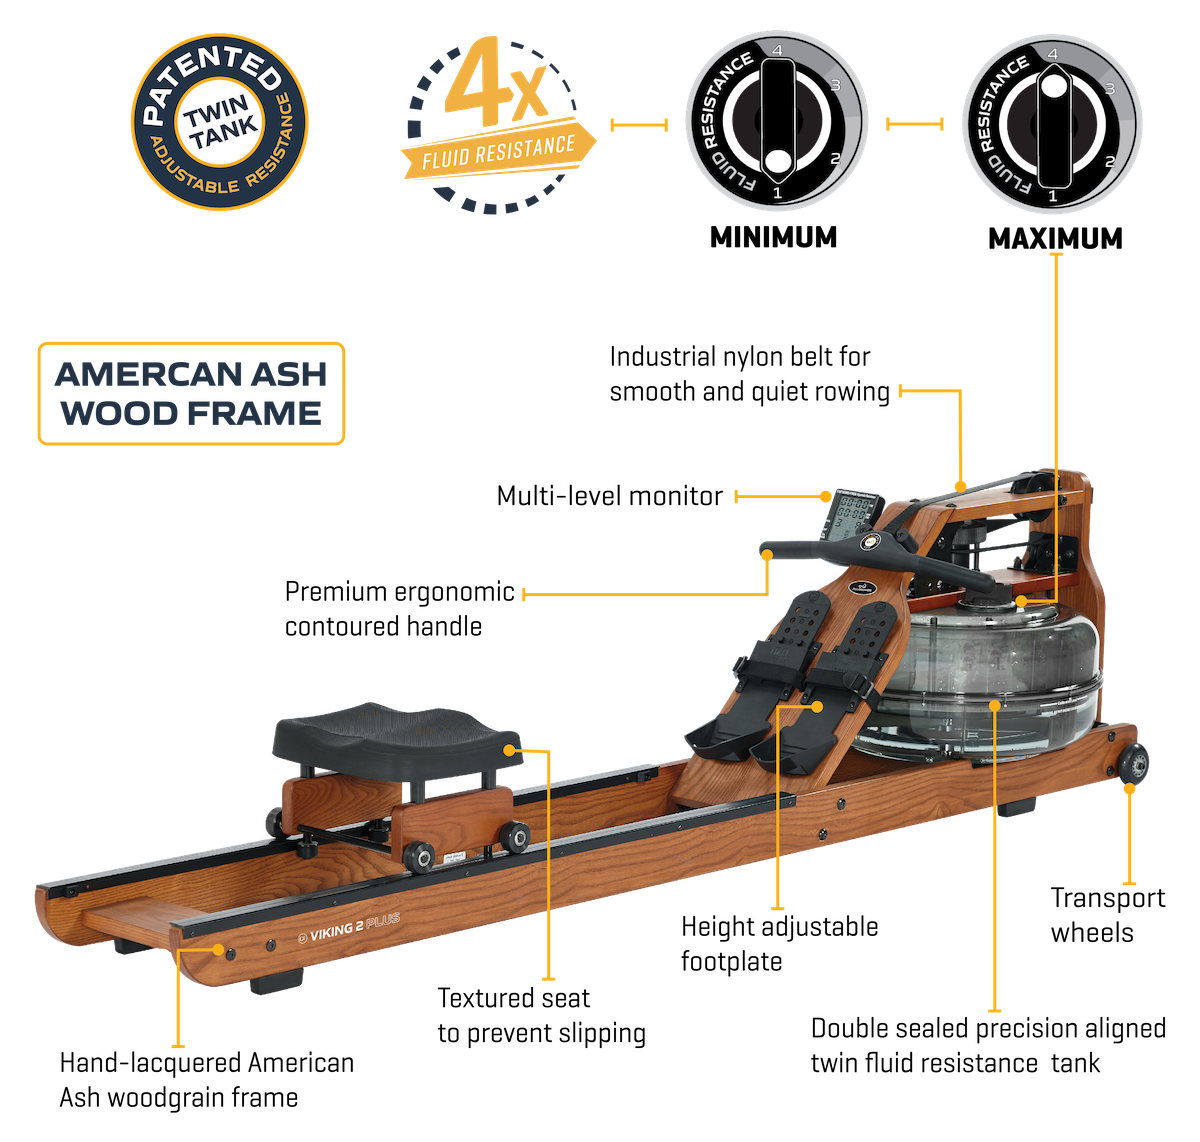 Indoor Fluid Rowing Machine with Computer Display - Viking 2 Plus - American Ash Wood Rails Brown with 4 levels of resistance